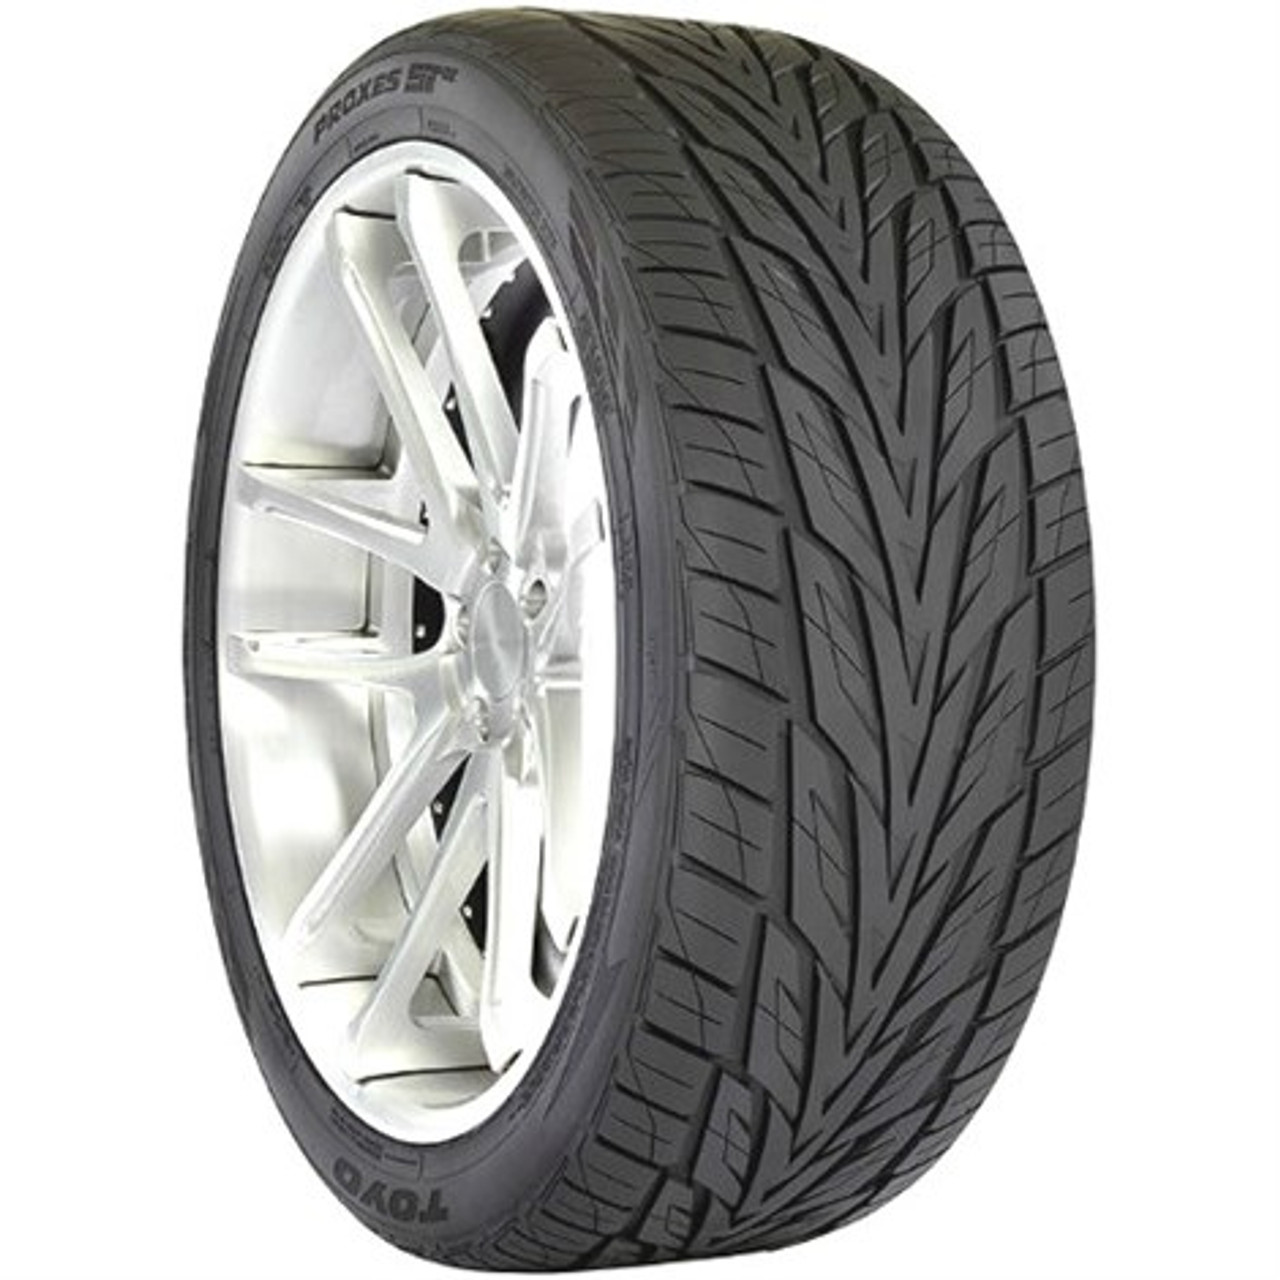 Toyo Proxes ST III Tire - 255/55R18